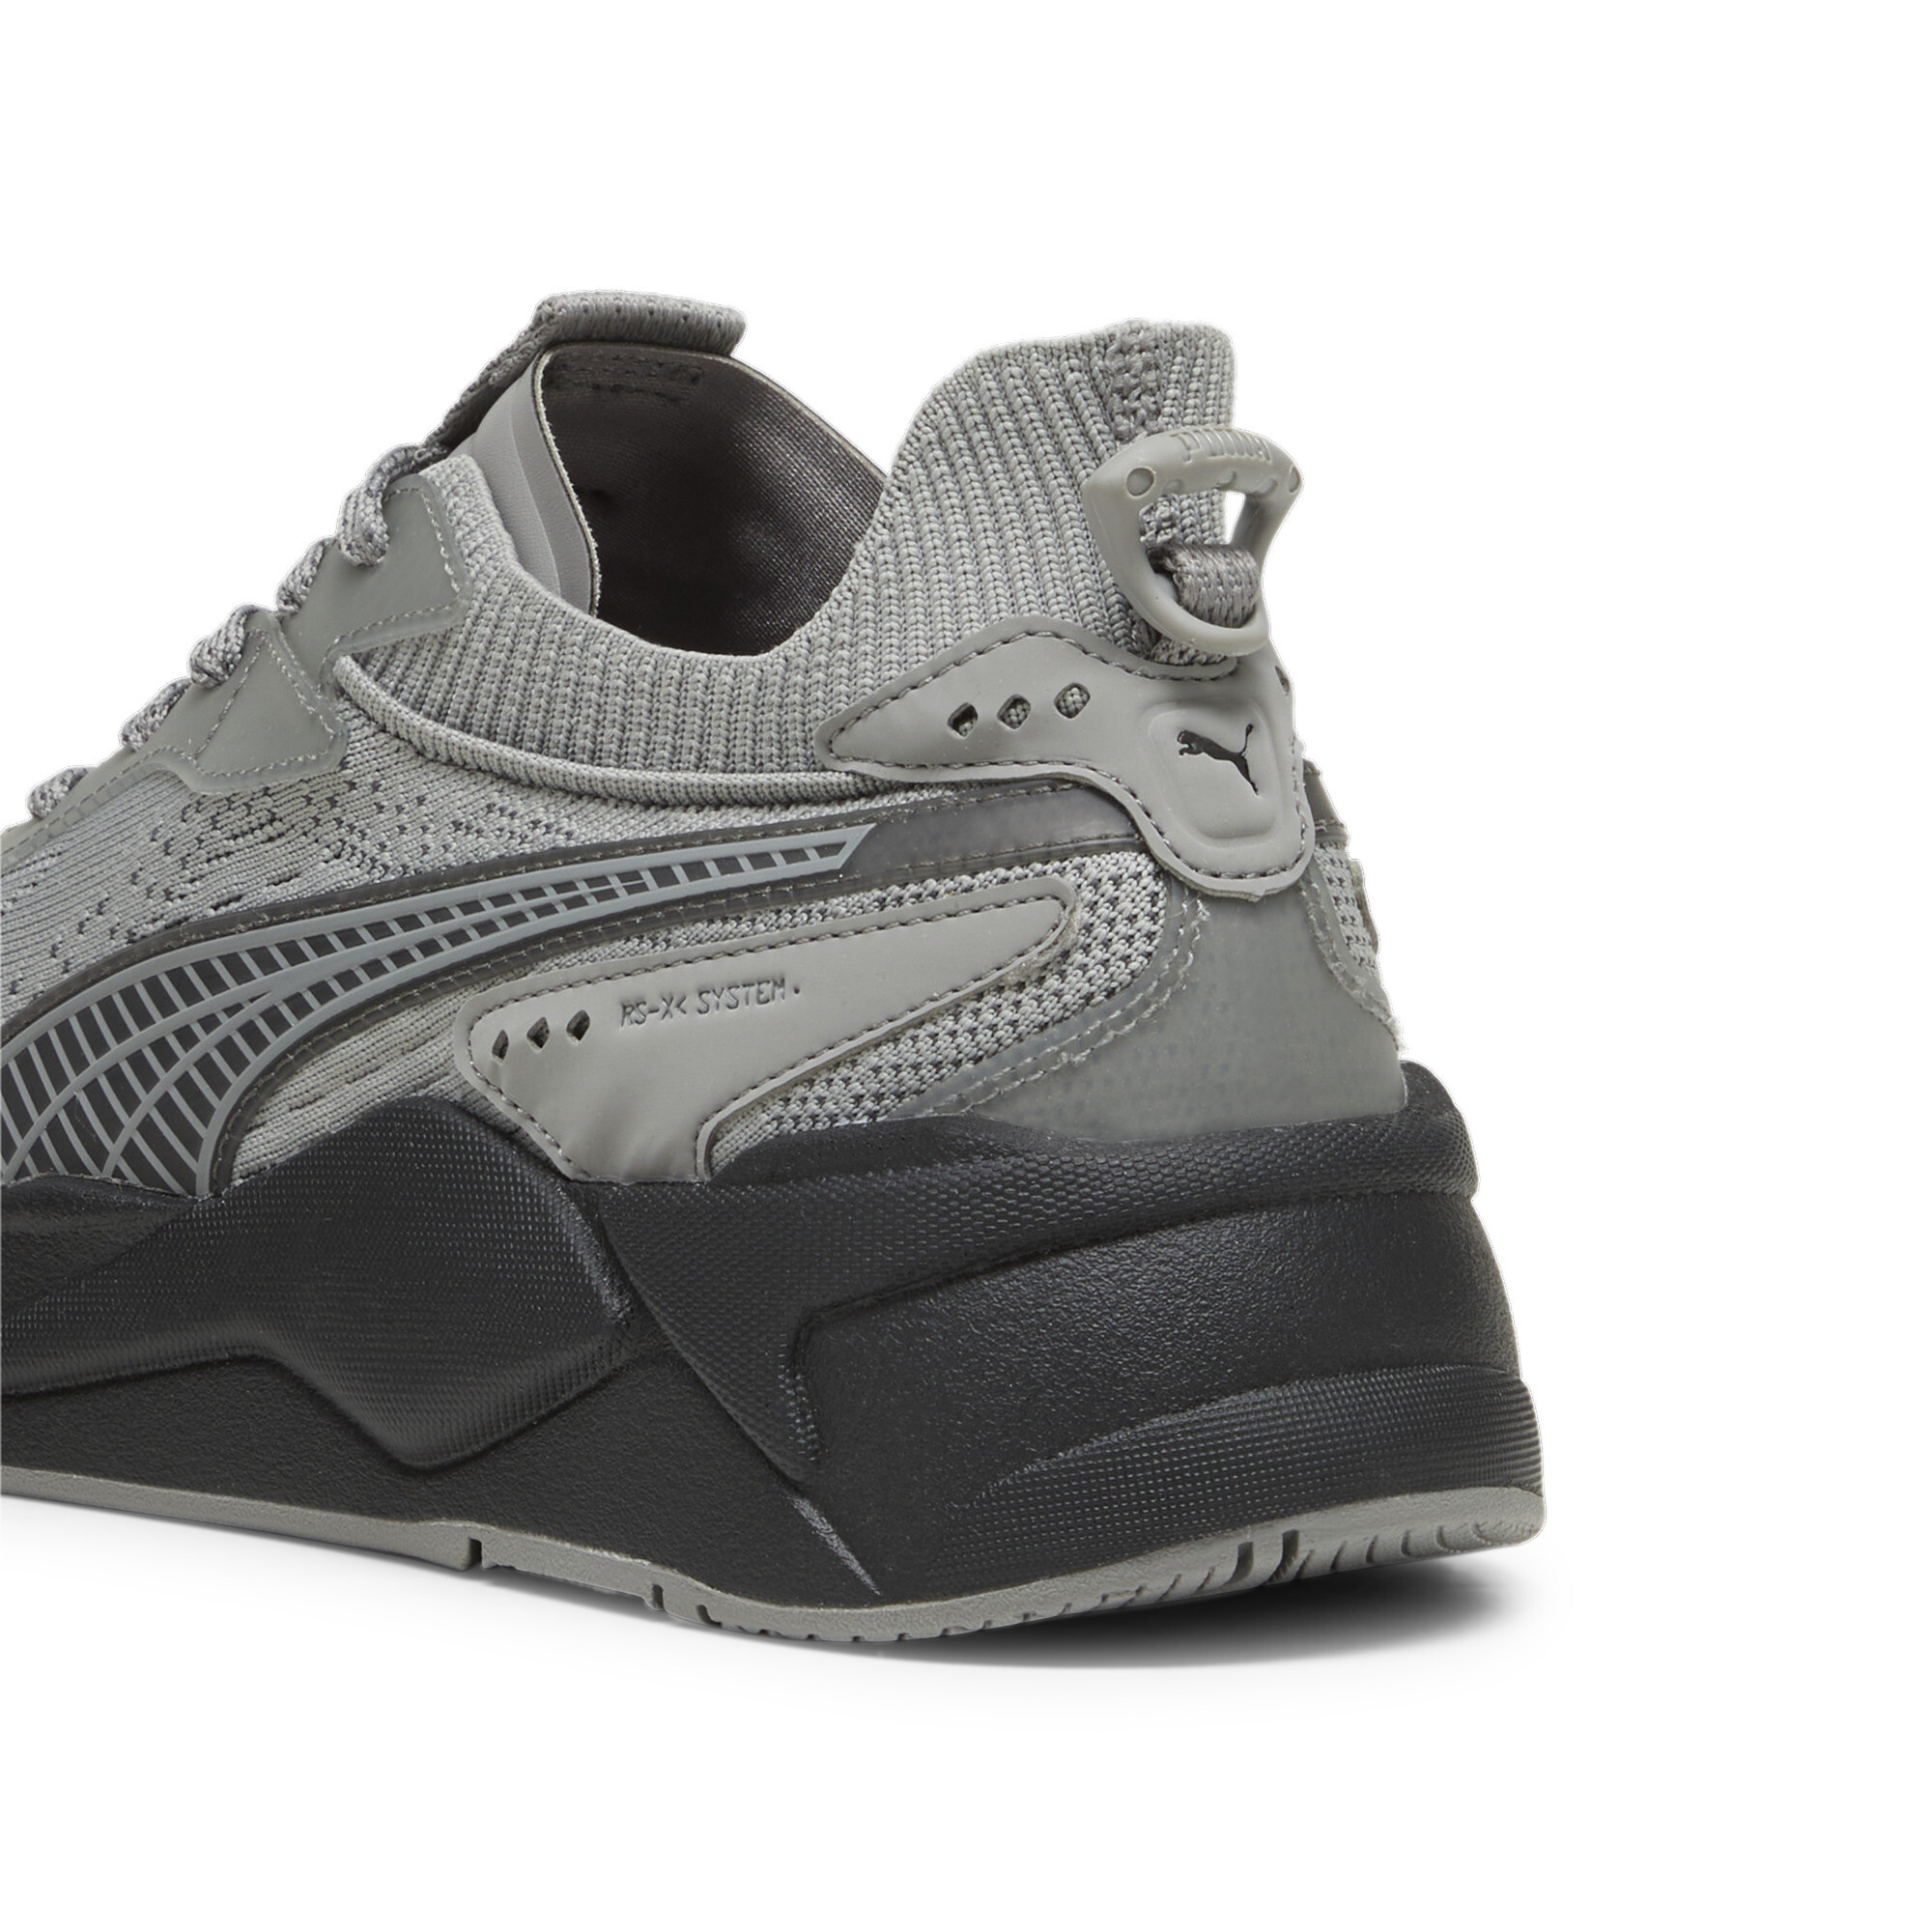 Puma RS-XK REMIX Sneakers, Gray, Size 35.5, Shoes